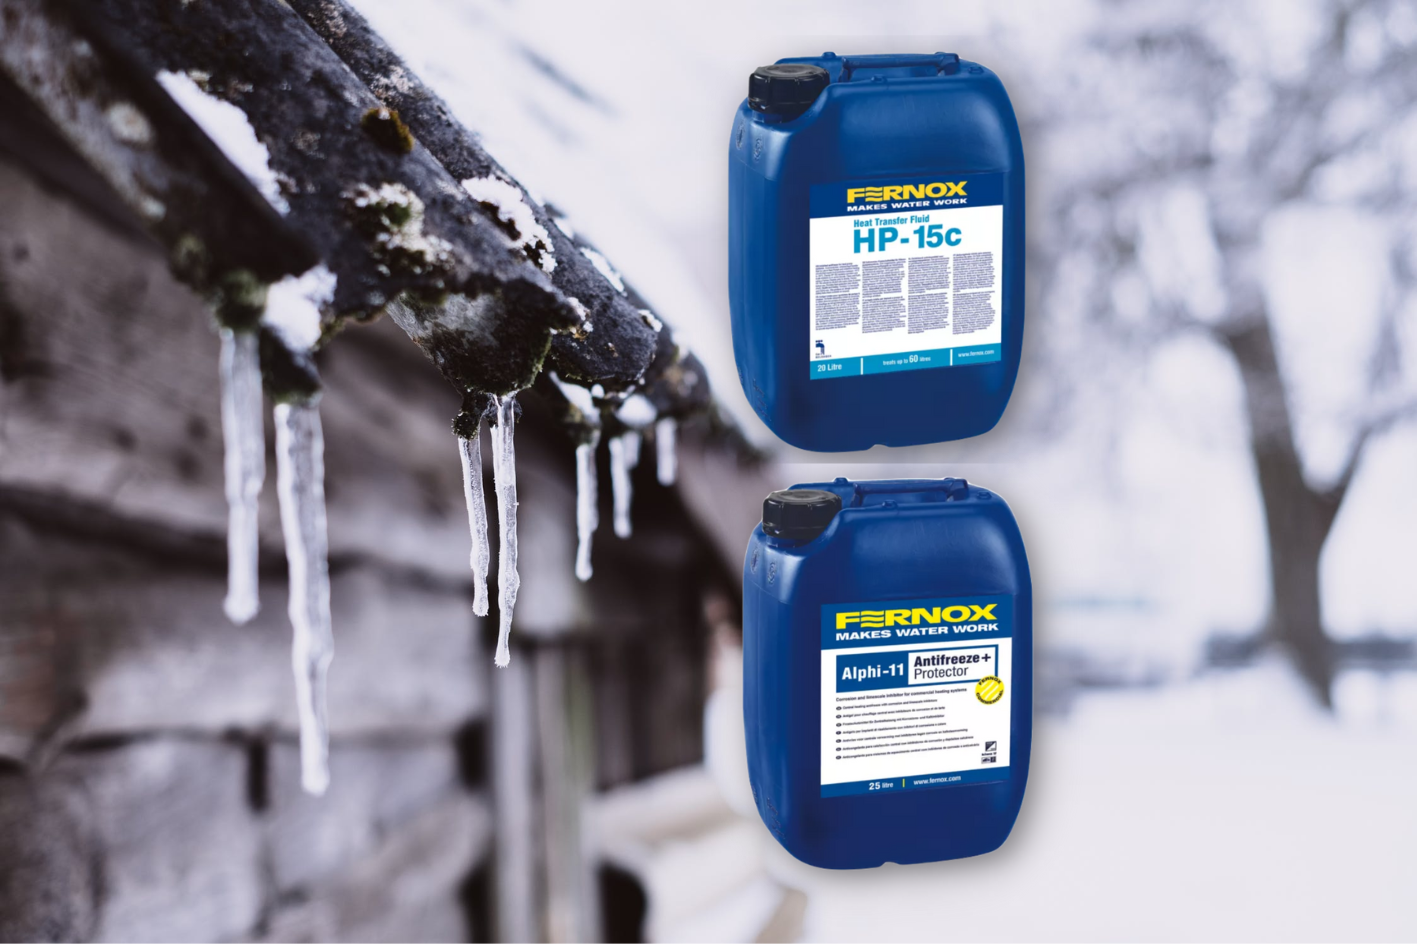 Read more about the article FERNOX Alphi-11 vs FERNOX HP-15C